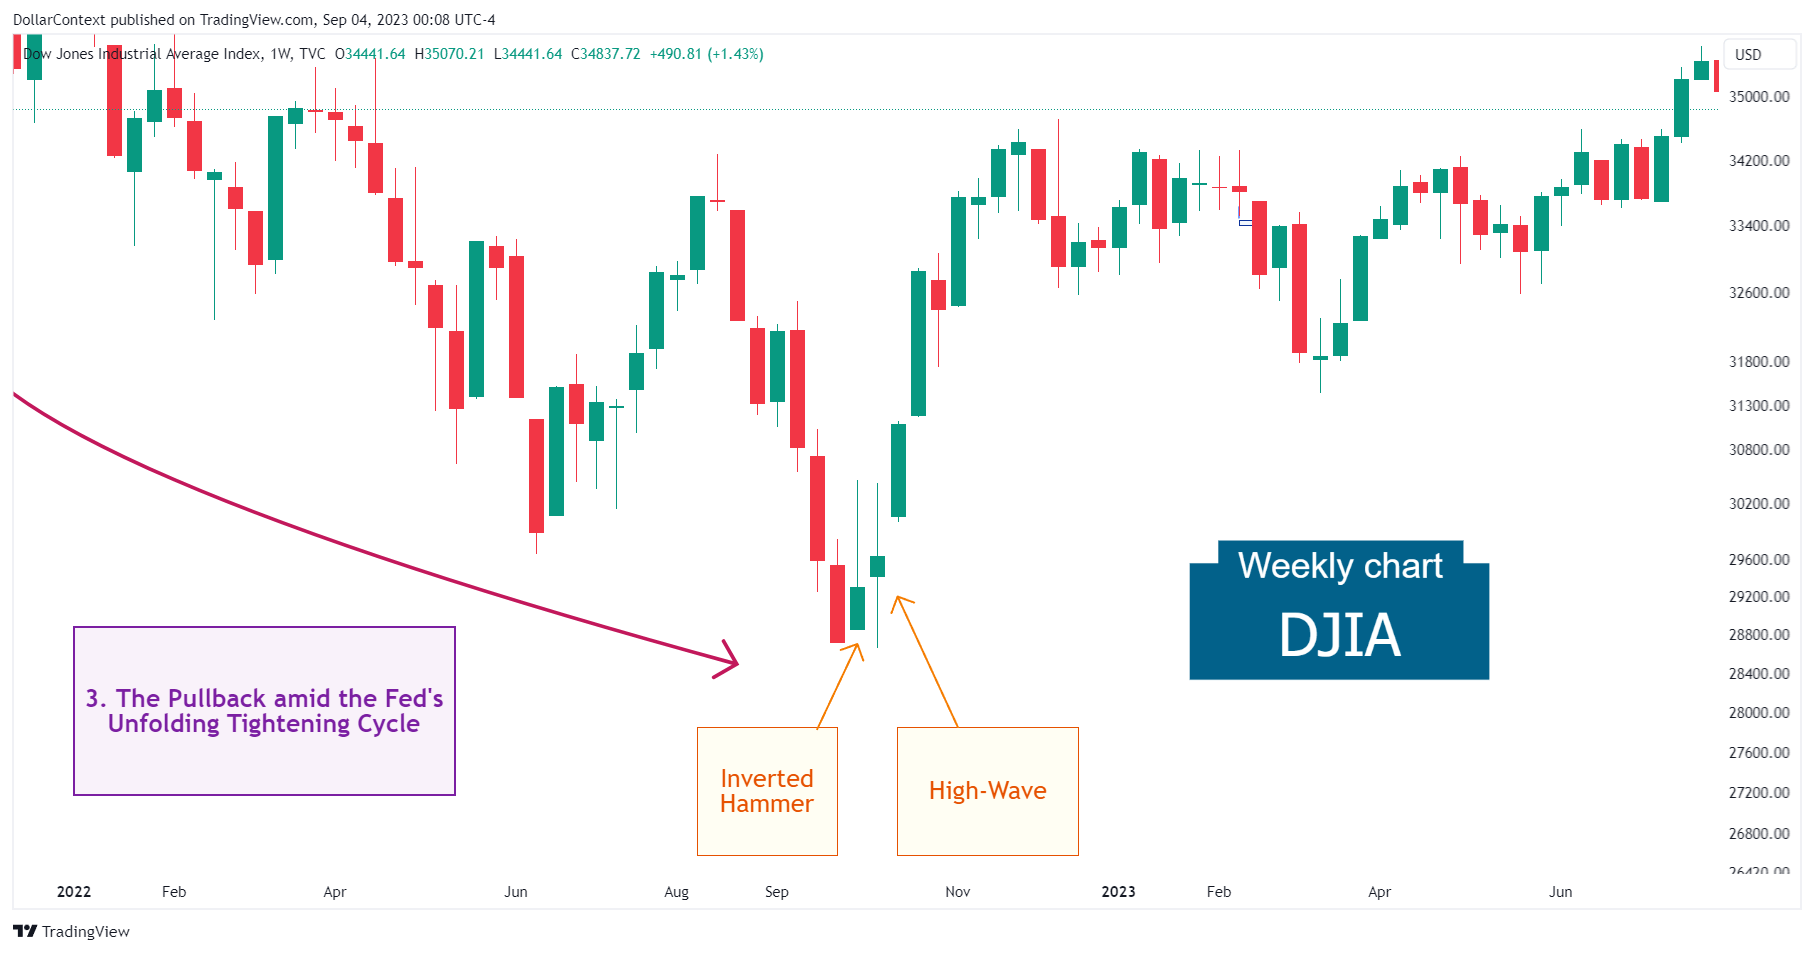 DJIA: Inverted Hammer and High-Wave Candle in October 2022 (Weekly Chart)